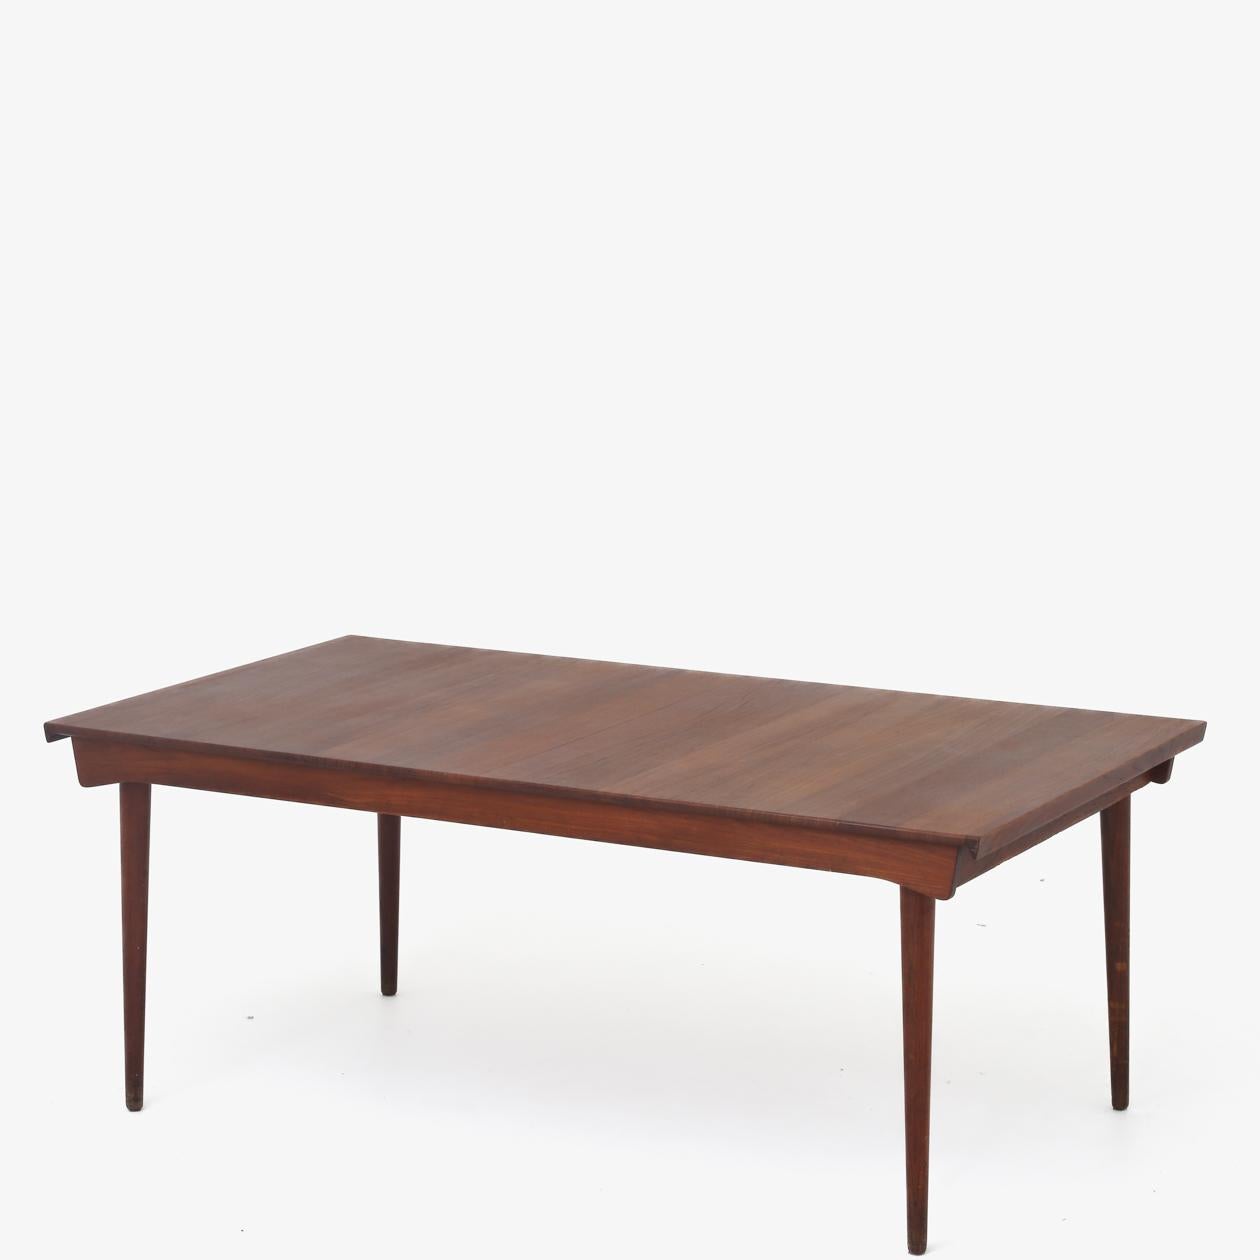 FD 540 - Dining table in teak with one extension plate of 50 cm. Finn Juhl / France & Son.